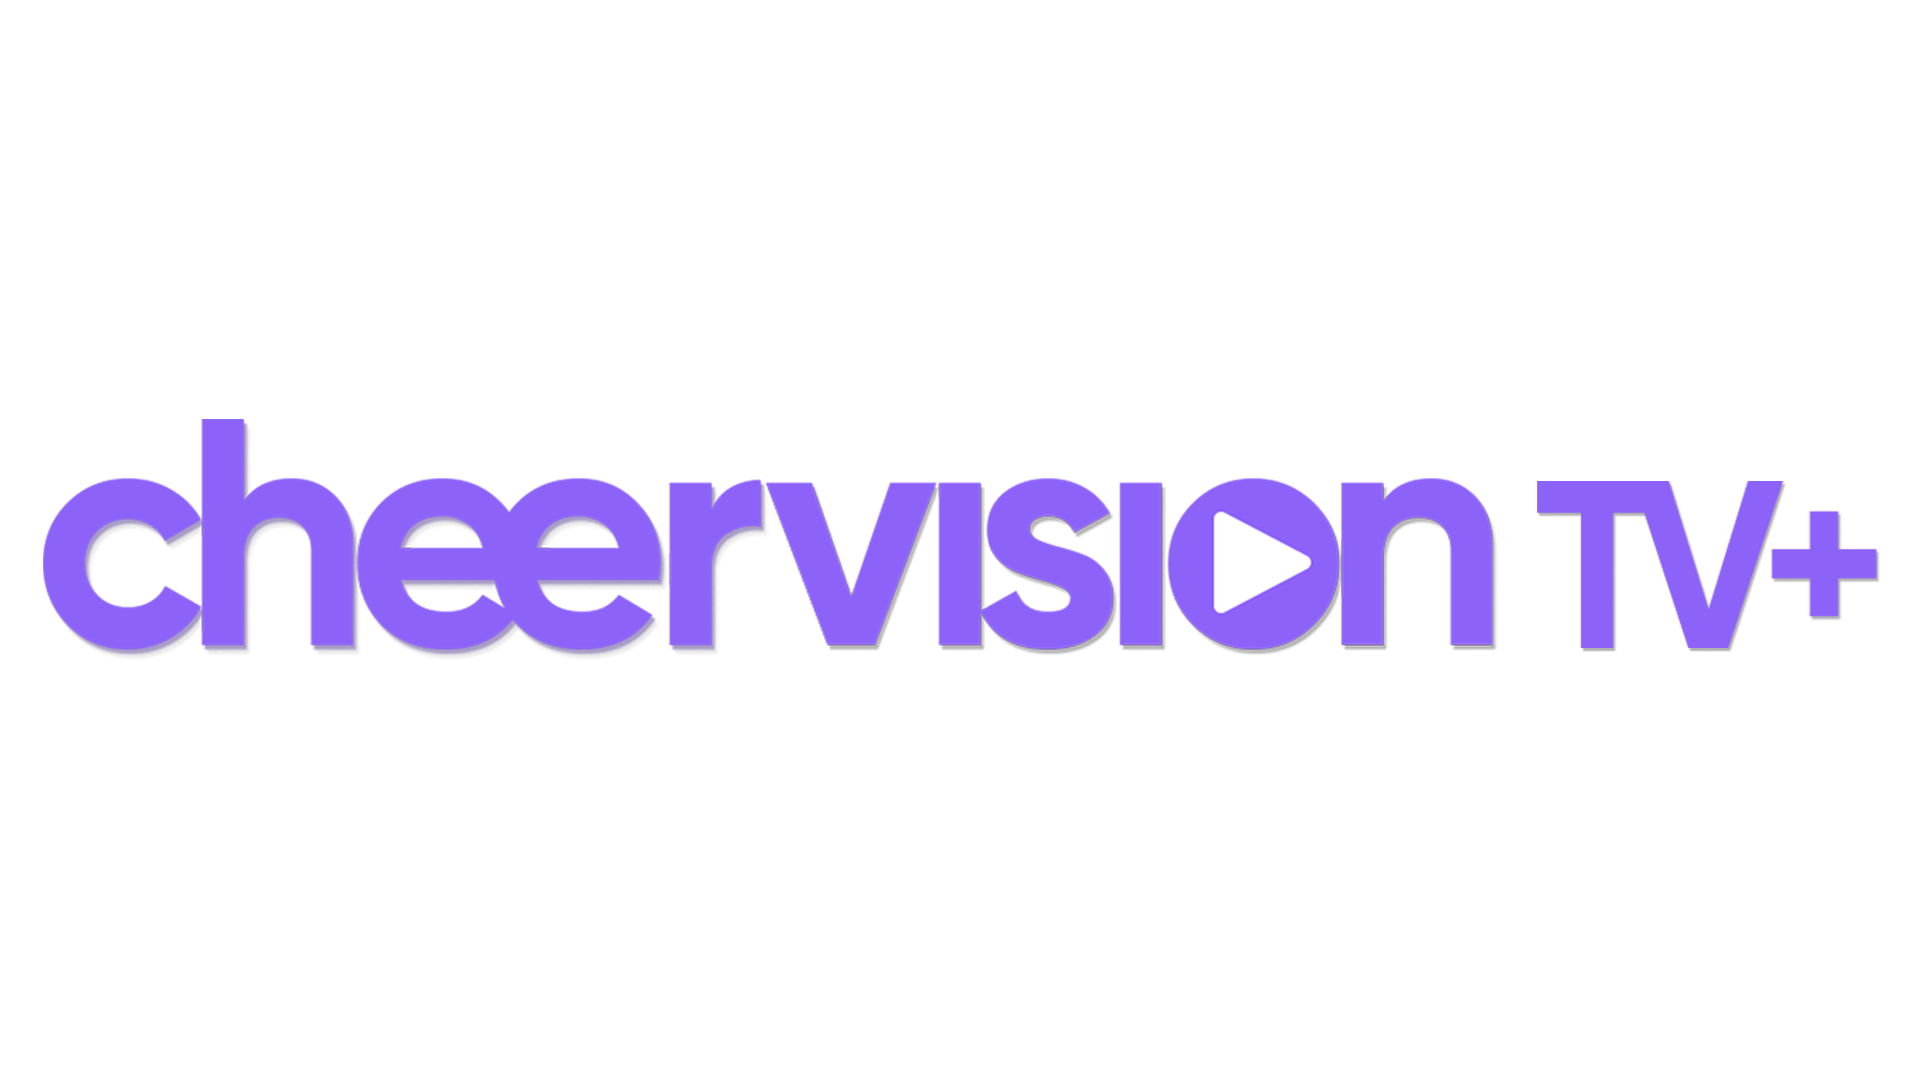 Beyond Traditional TV Experience - Explore the Infinite Possibilities with CheerVision TV+